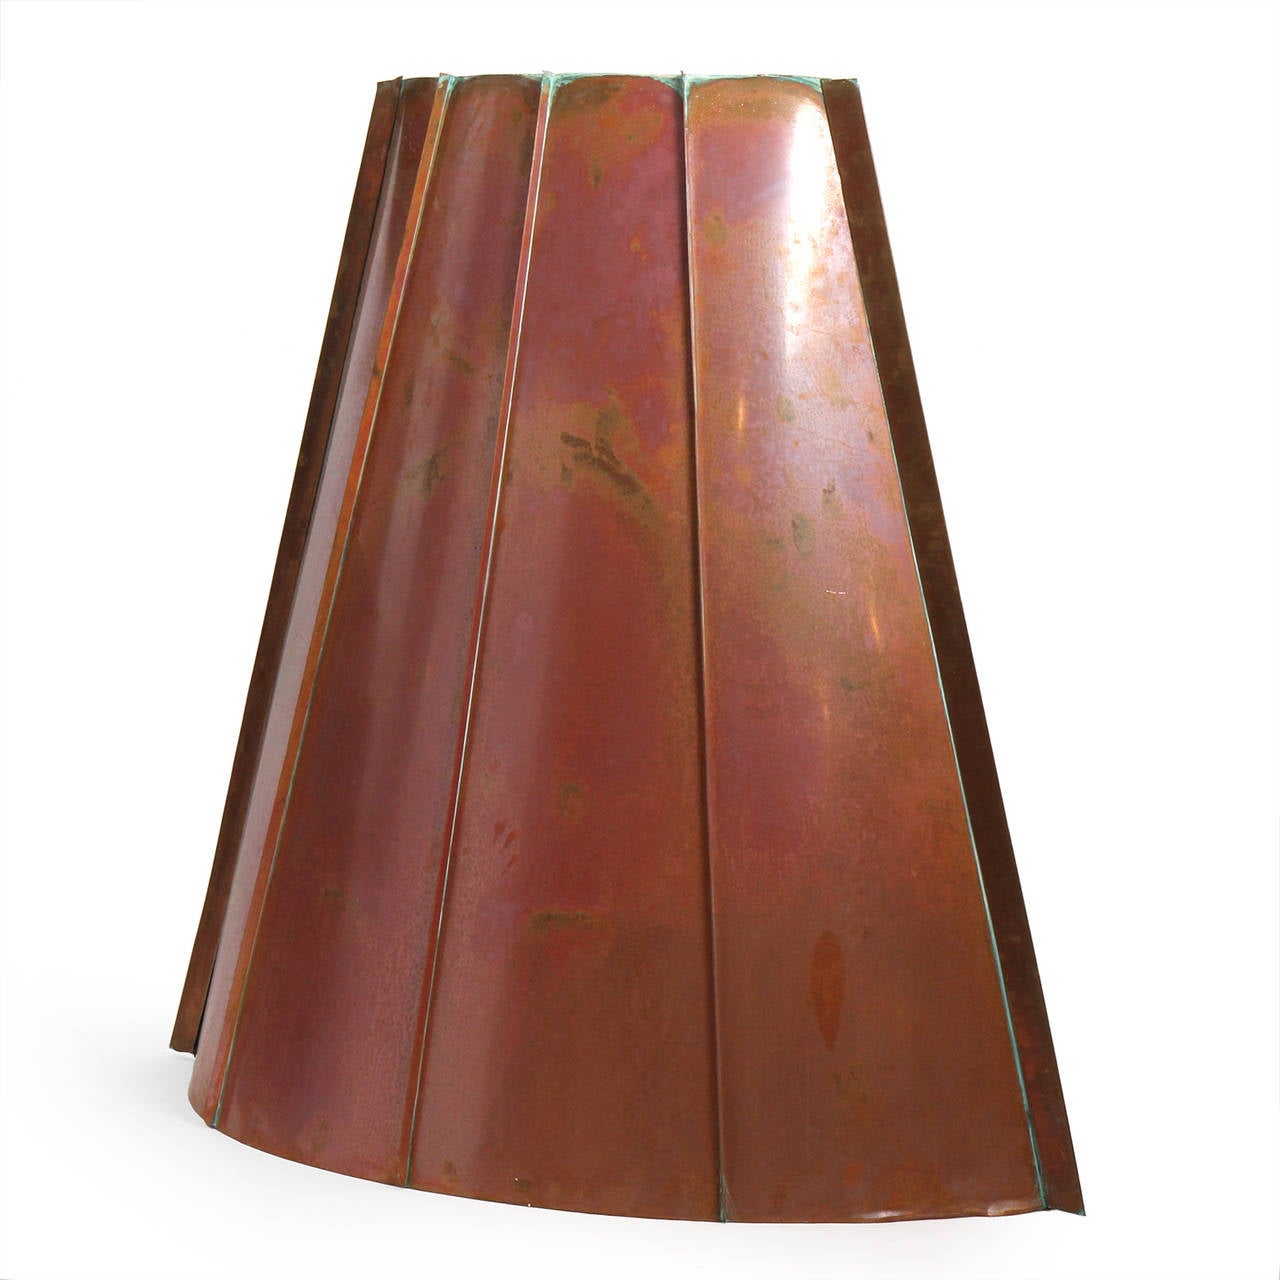 A large scaled and beautifully constructed custom copper flue or hood made of standing seam tapered panels having a warm patina.